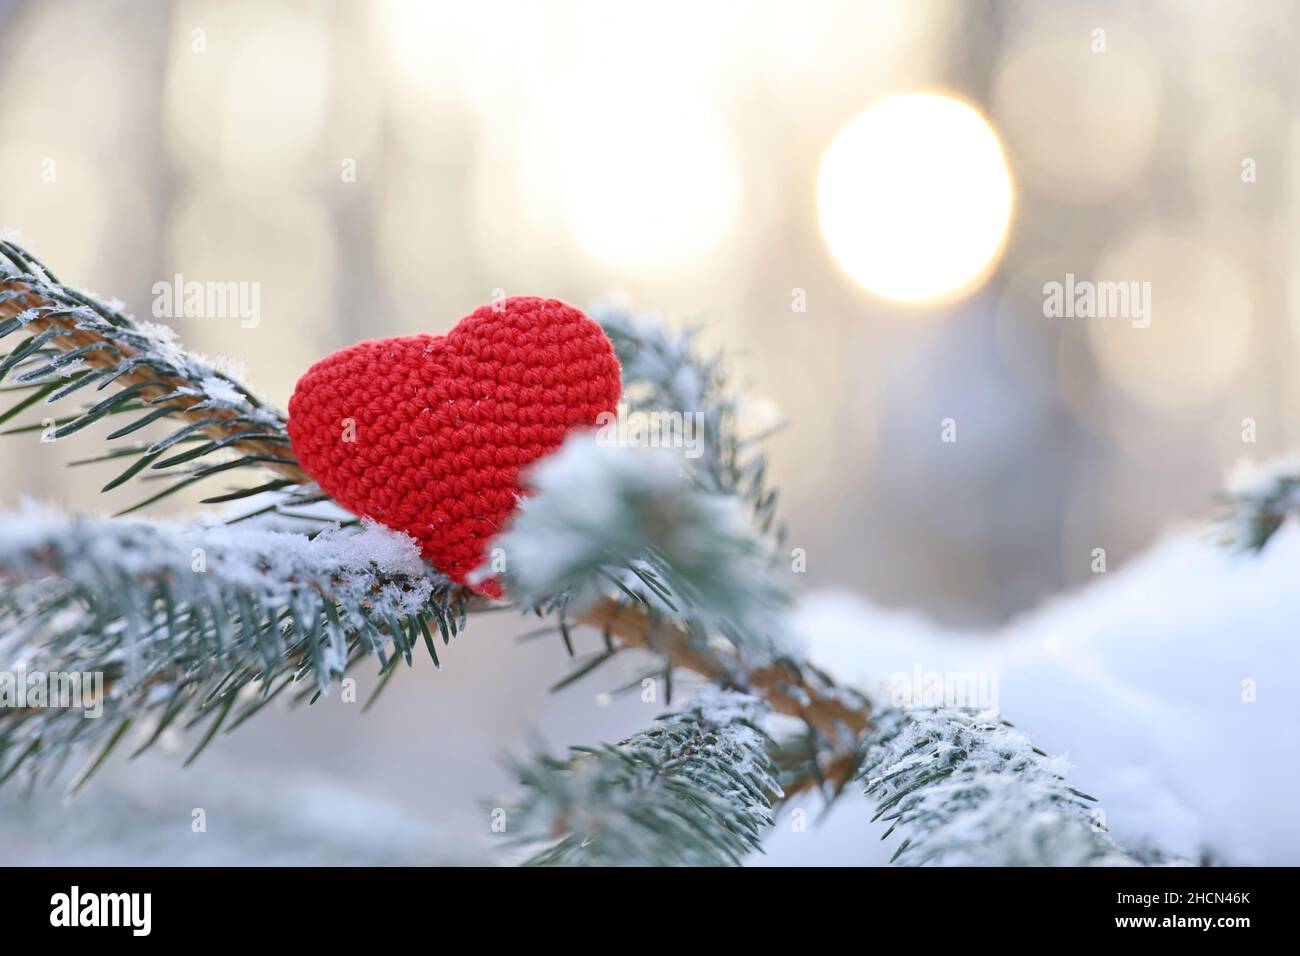 Love heart on fir branches covered with snow and ice on winter sun background. Concept of New Year celebration or Valentine's day Stock Photo